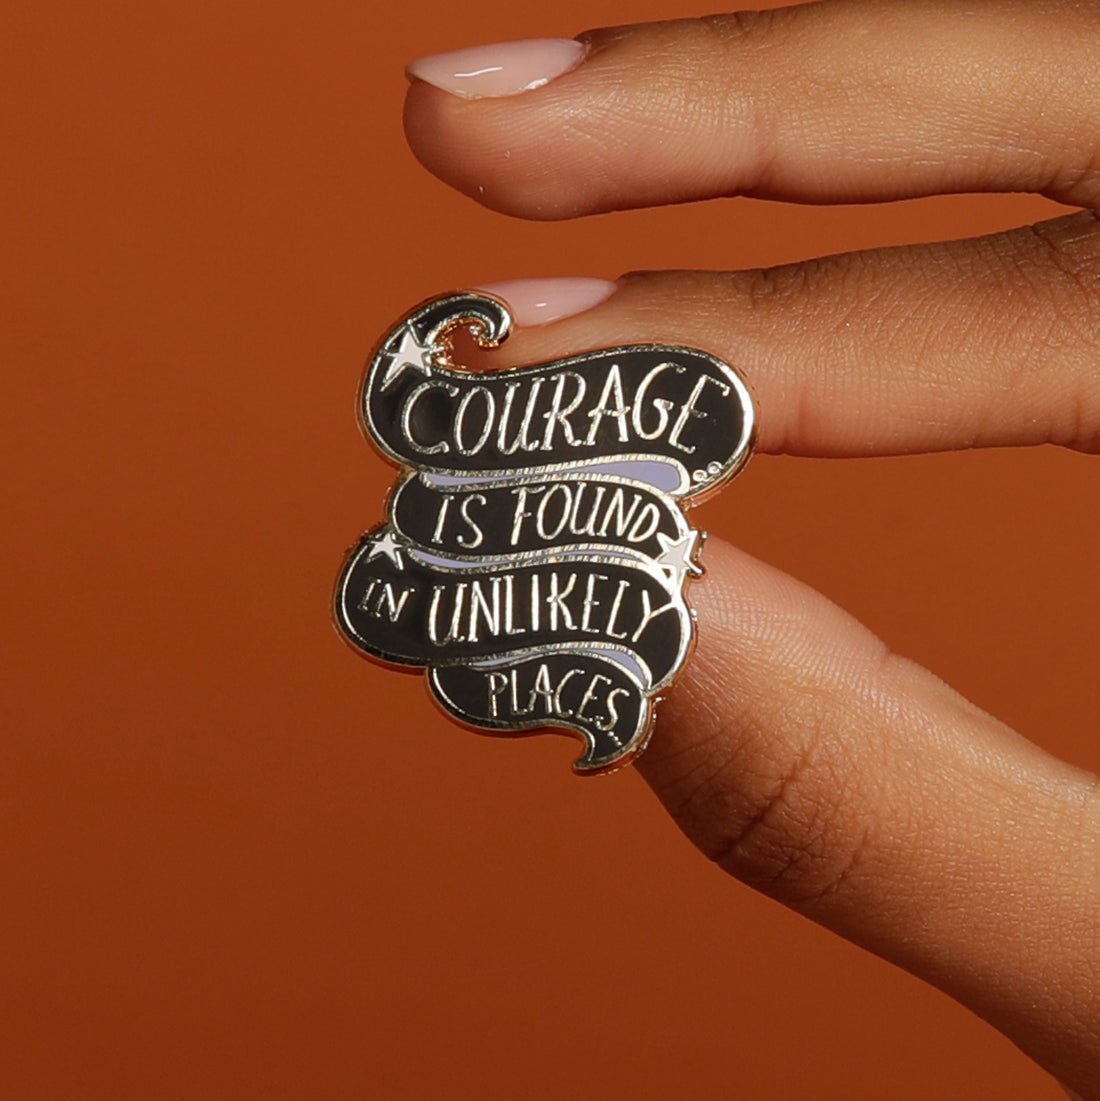 Courage is found in unlikely places enamel pin